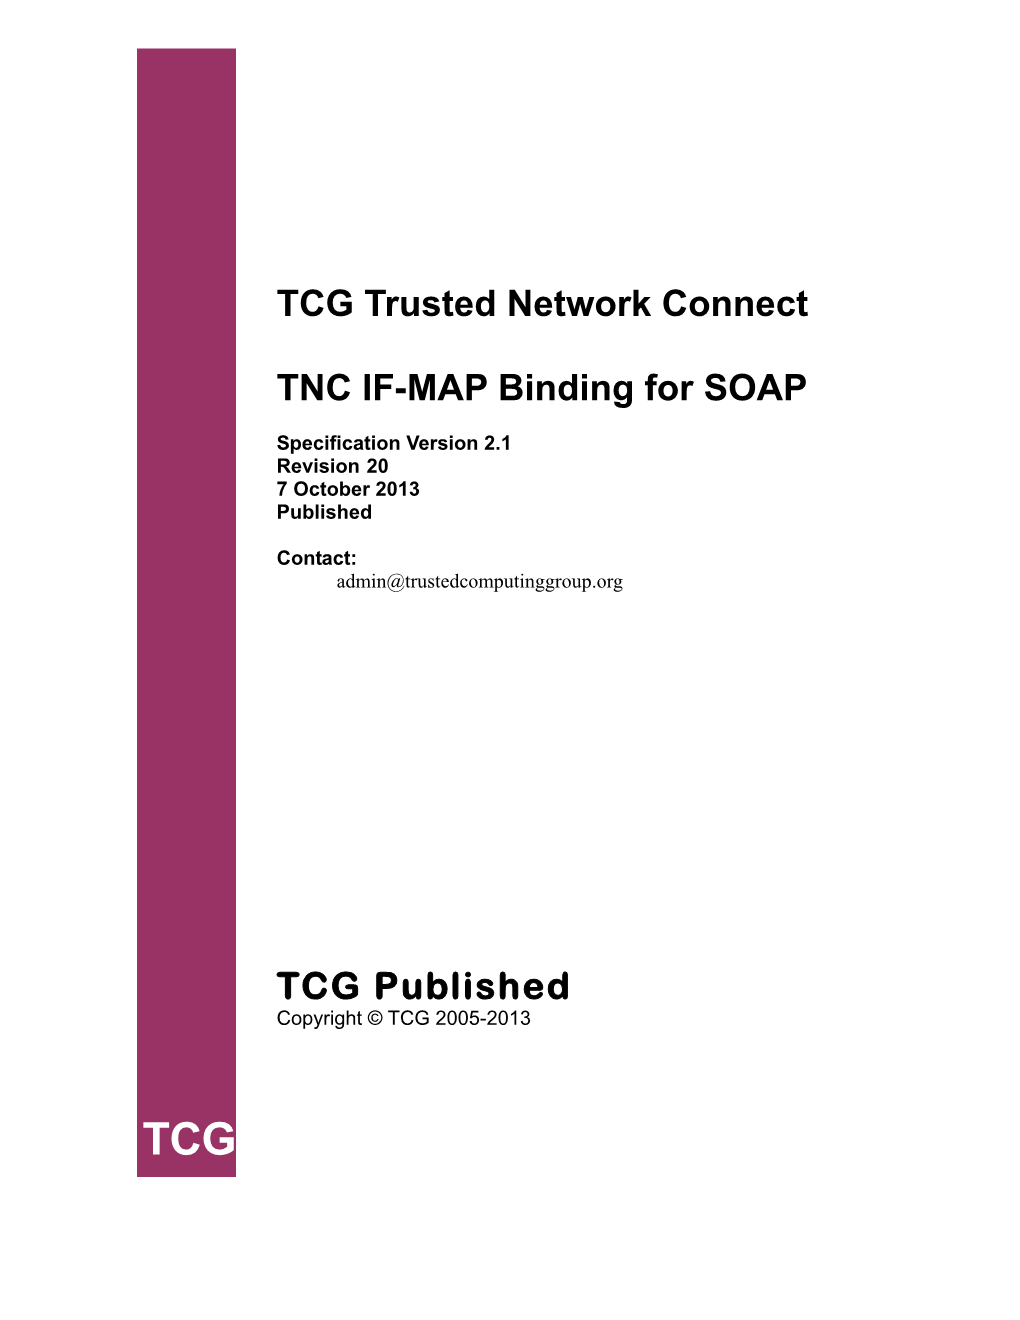 TCG TNC IF-MAP Binding for SOAP Version